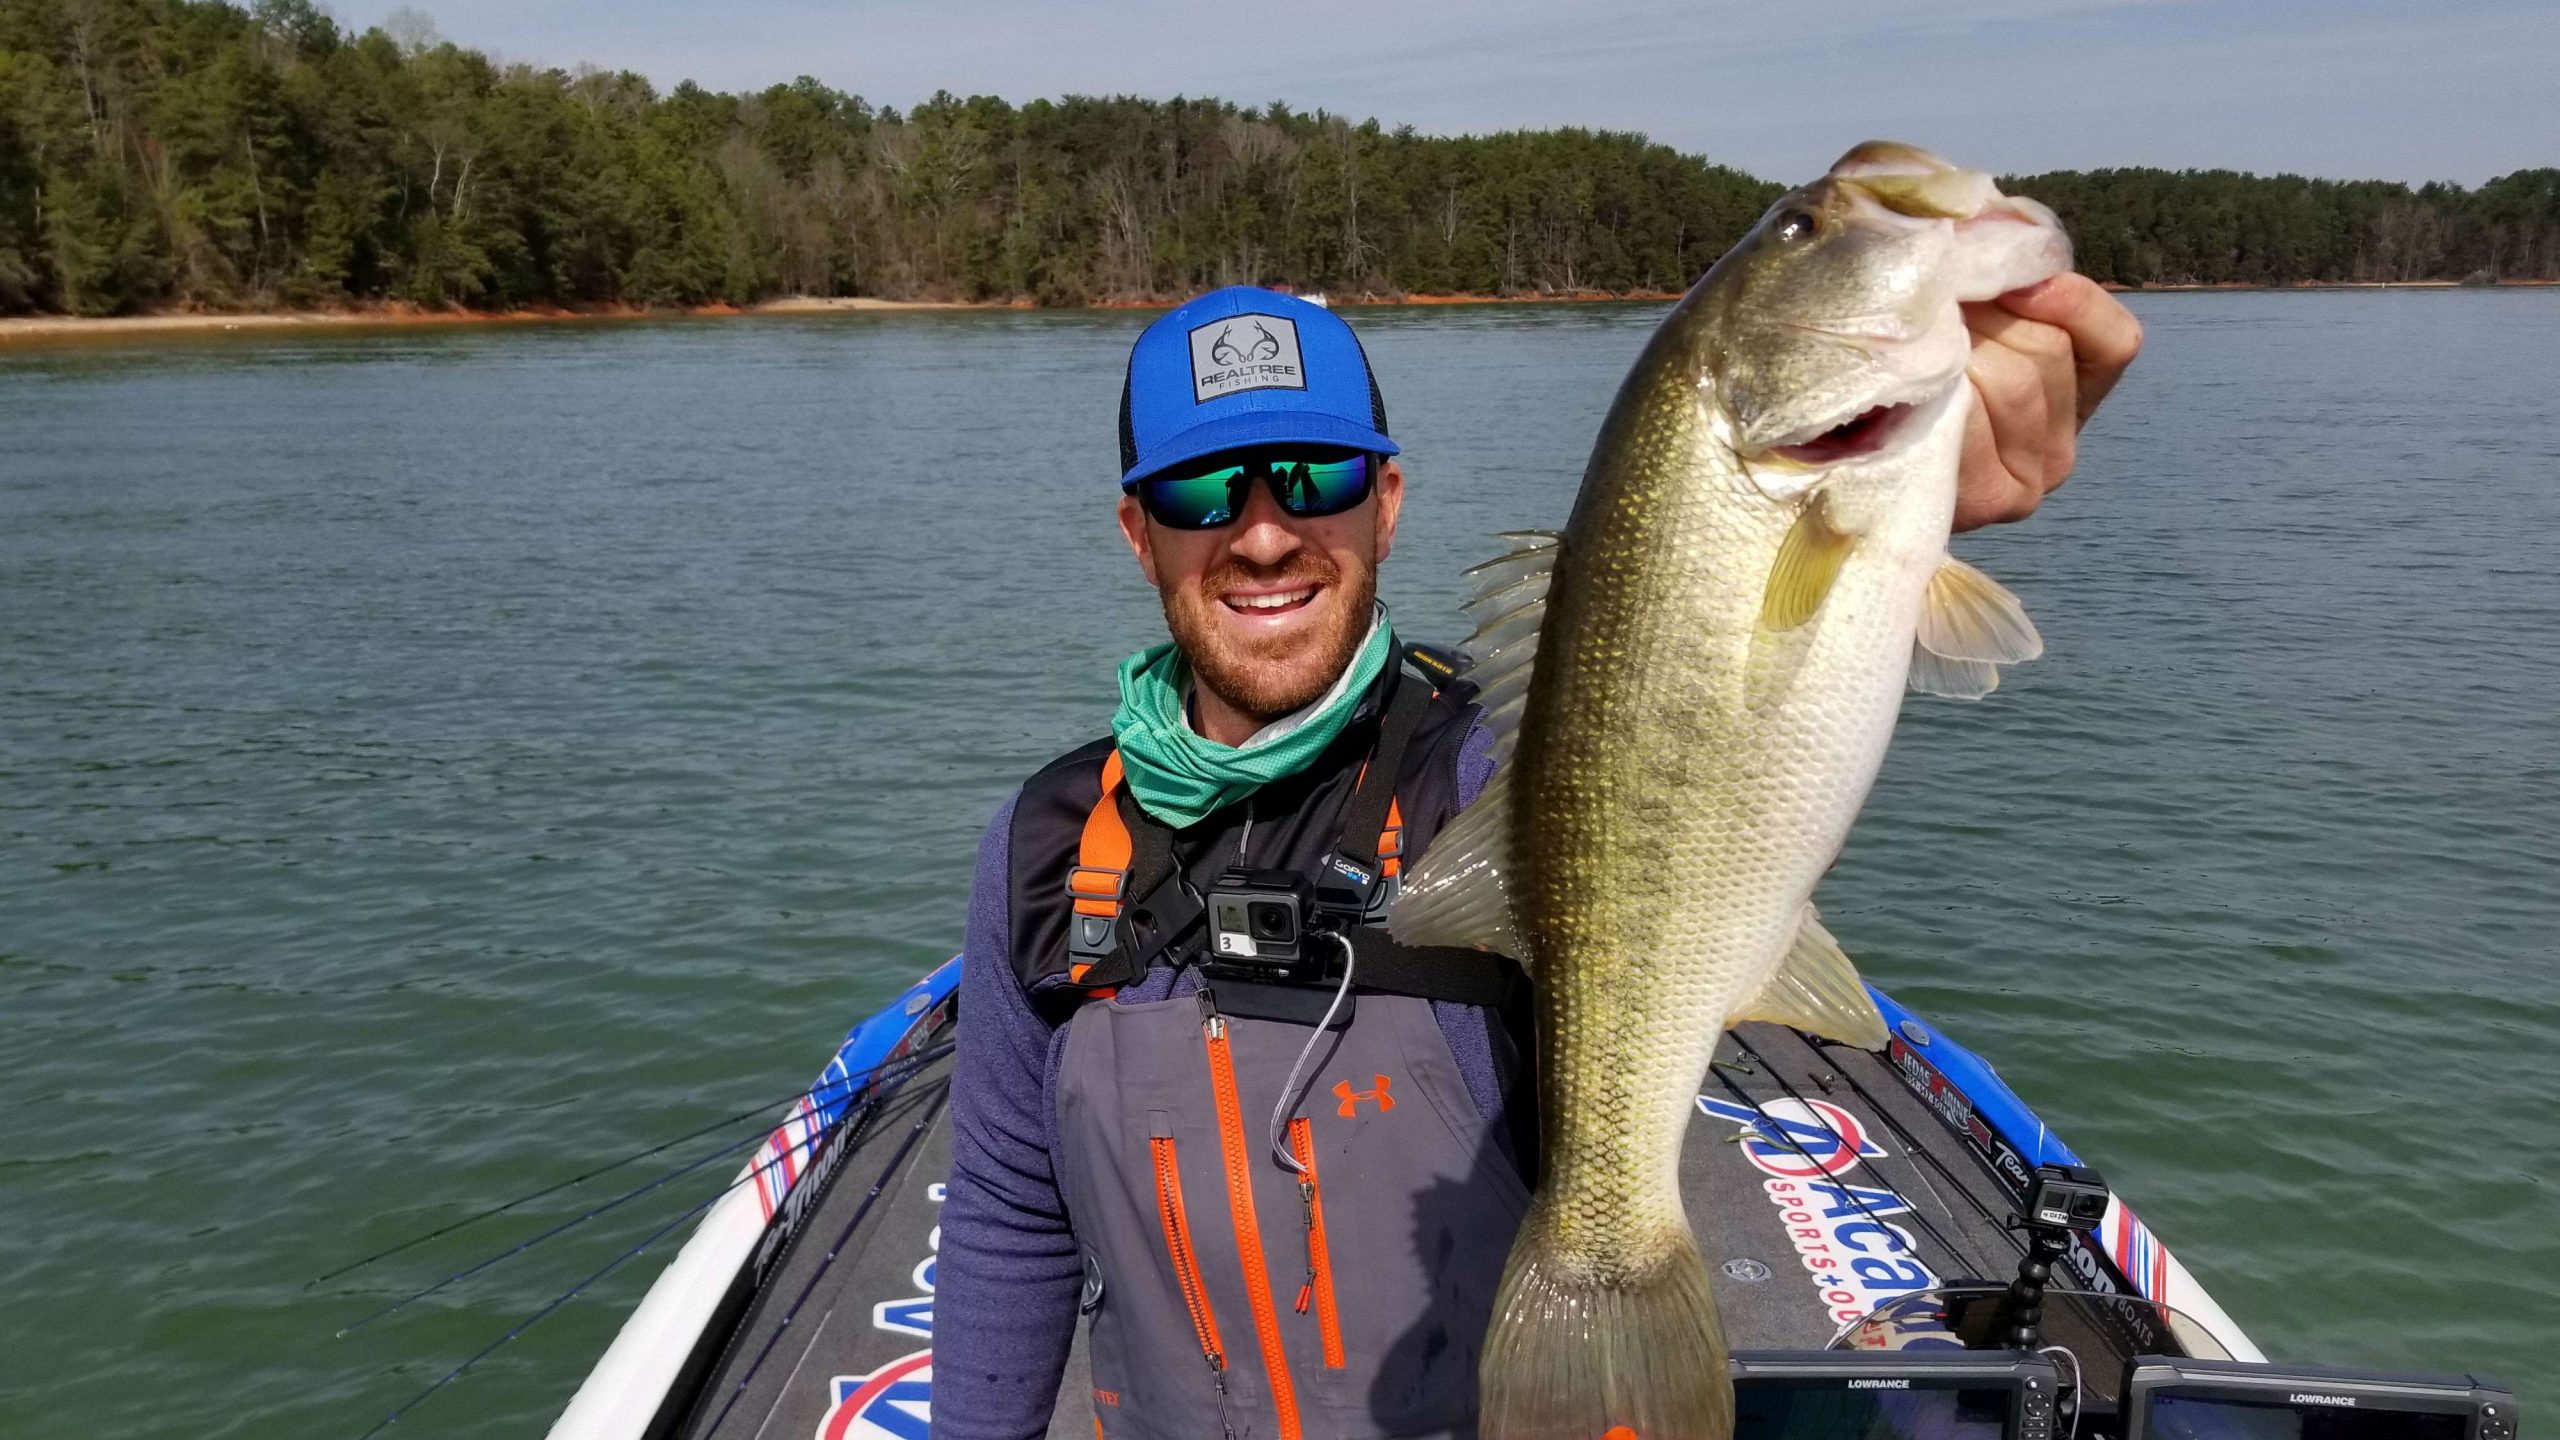 After a bit of a lull, Wheeler went looking for spots, but to his surprise ran into ole' Mr. Largemouth!